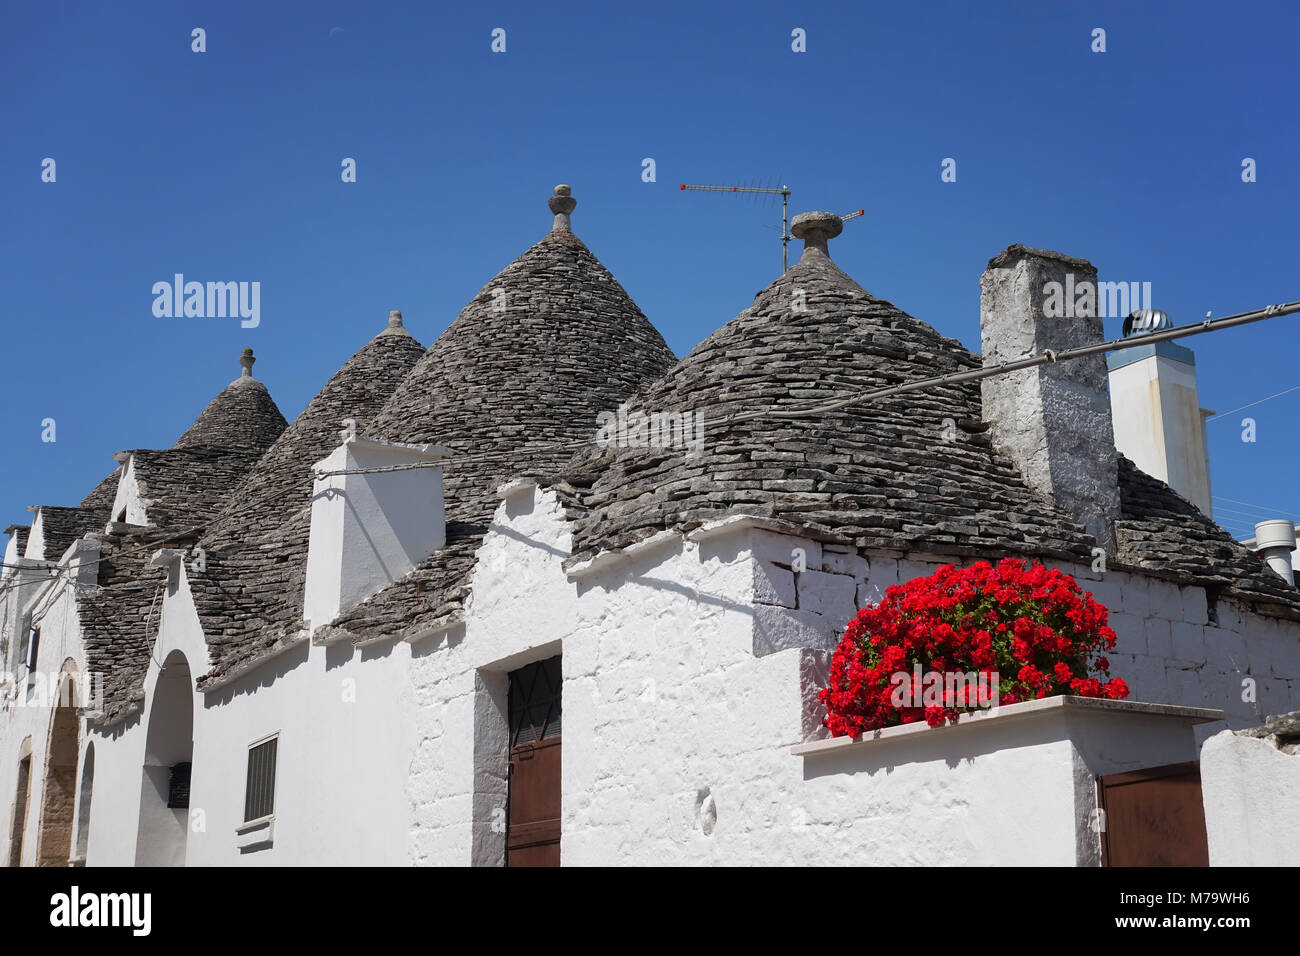 Traditional white trulli houses with cone-shaped roofs with some red geranium flowers under a clear blue sky in Alberobello, a city in Apulia, Italy. Stock Photo